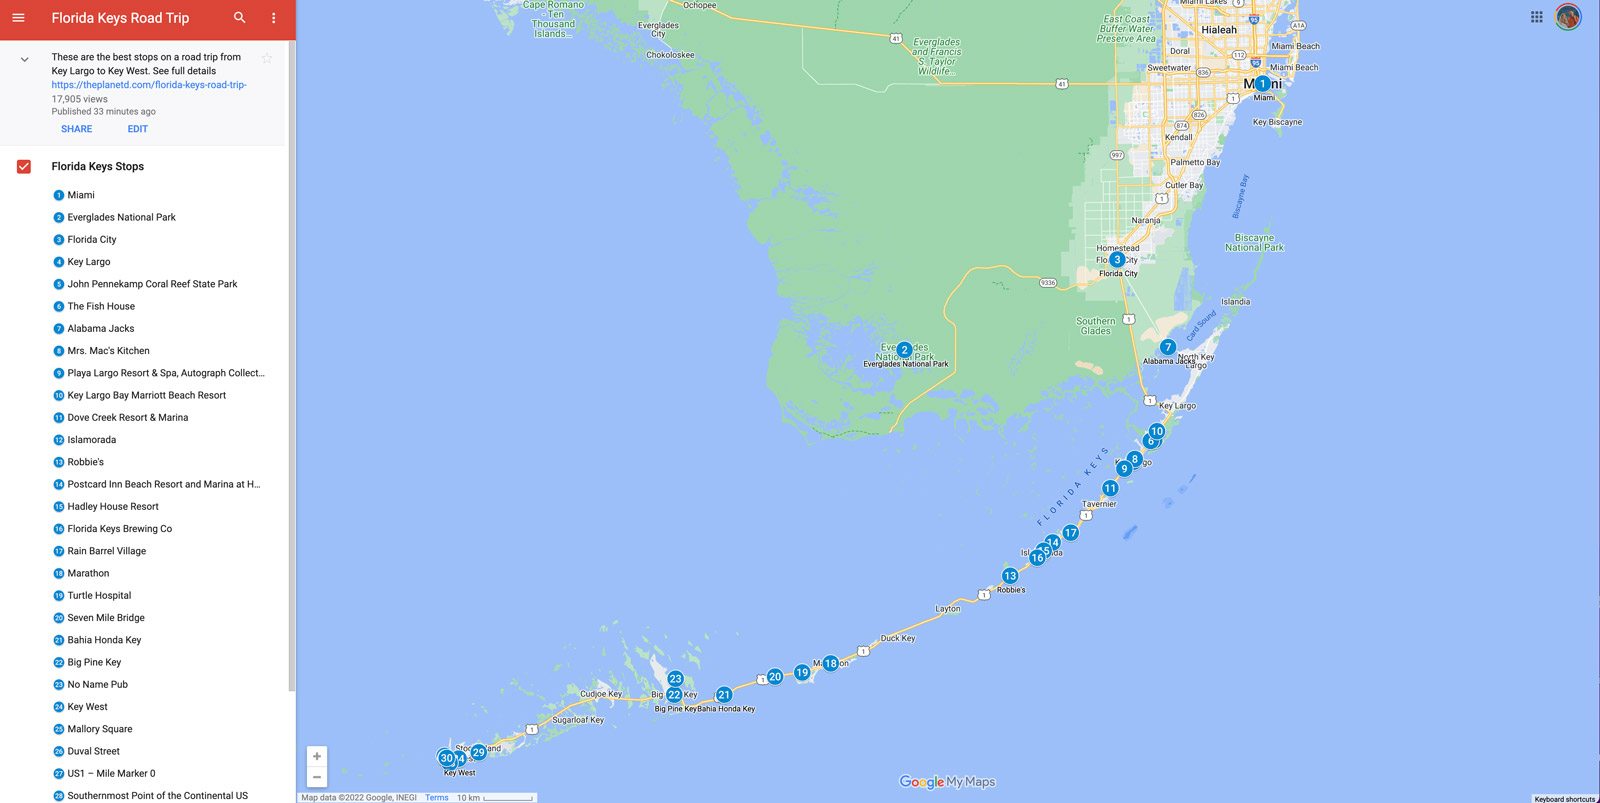 miami to key west drive stops on the Florida Keys